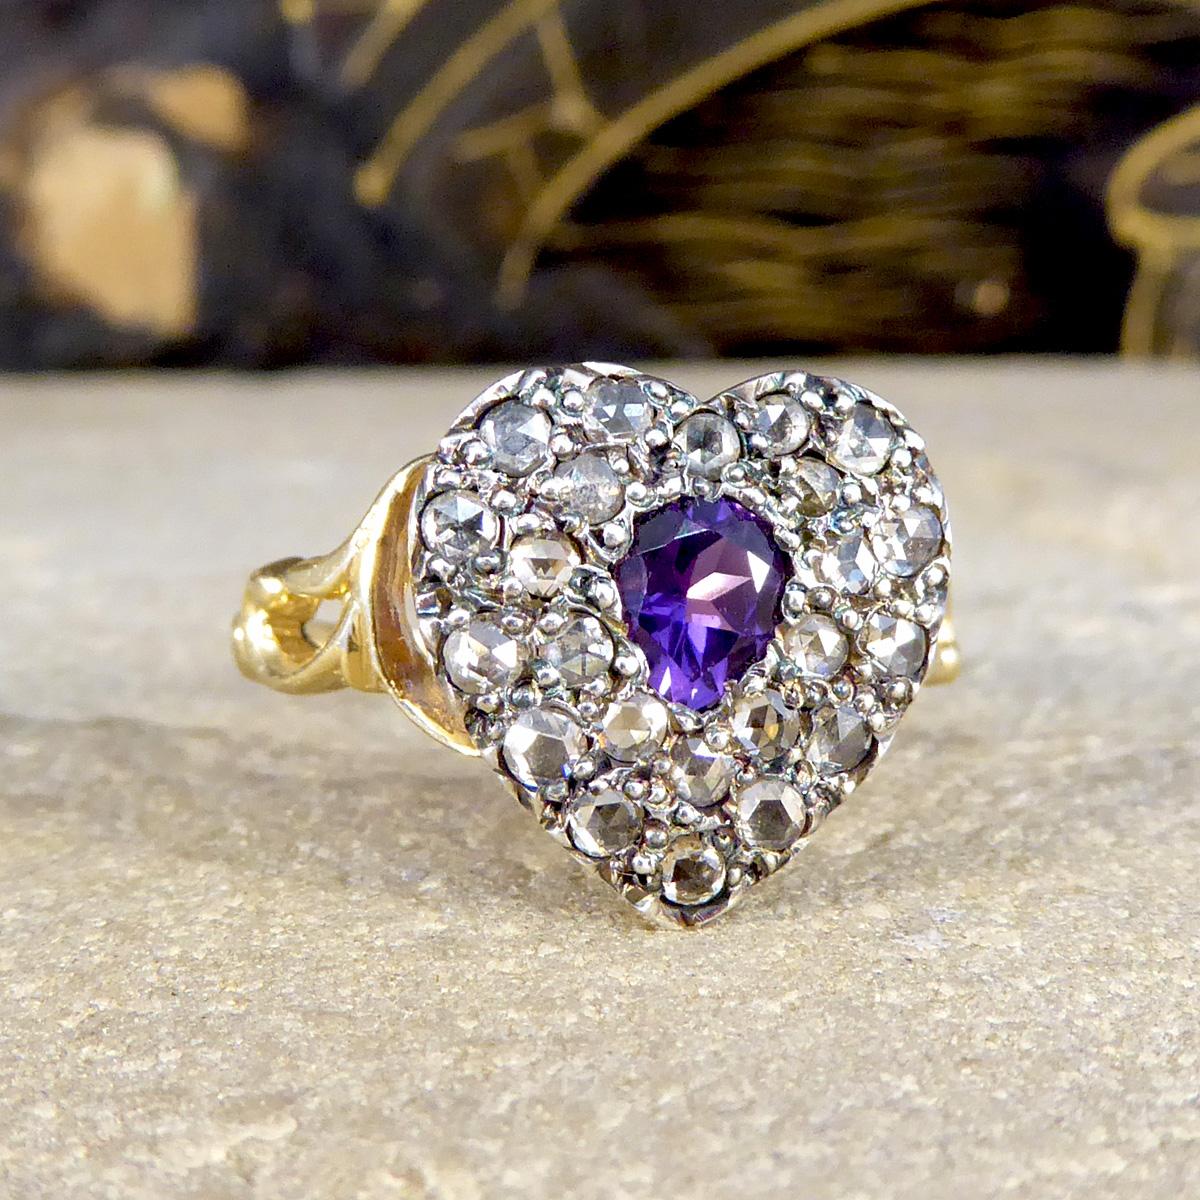 This lovely contemporary ring has been crafted to resemble and be disguised as an Early Victorian ring. Featuring in this ring is a 0.28ct Pear Cut Amethyst showing a bright and vibrant purple colour surrounded by a double cluster of Rose Cut